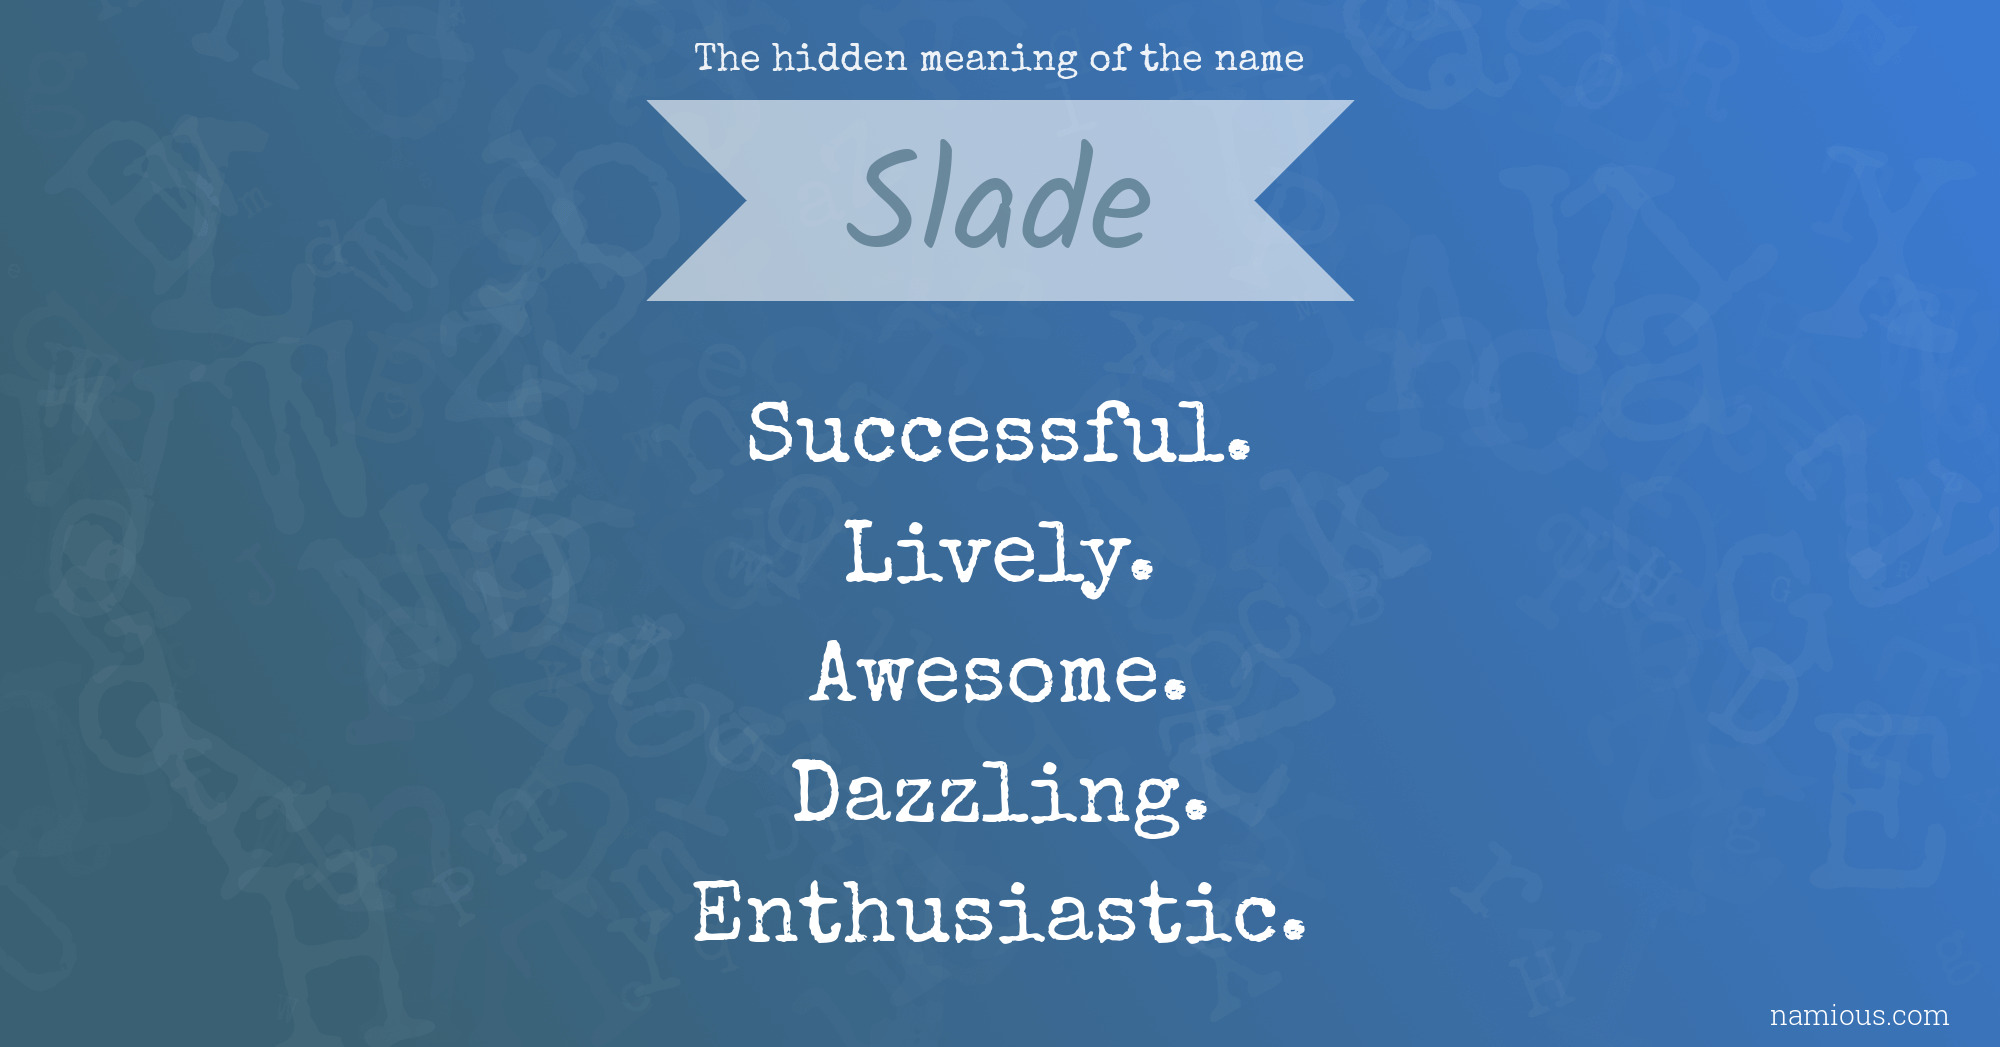 The hidden meaning of the name Slade